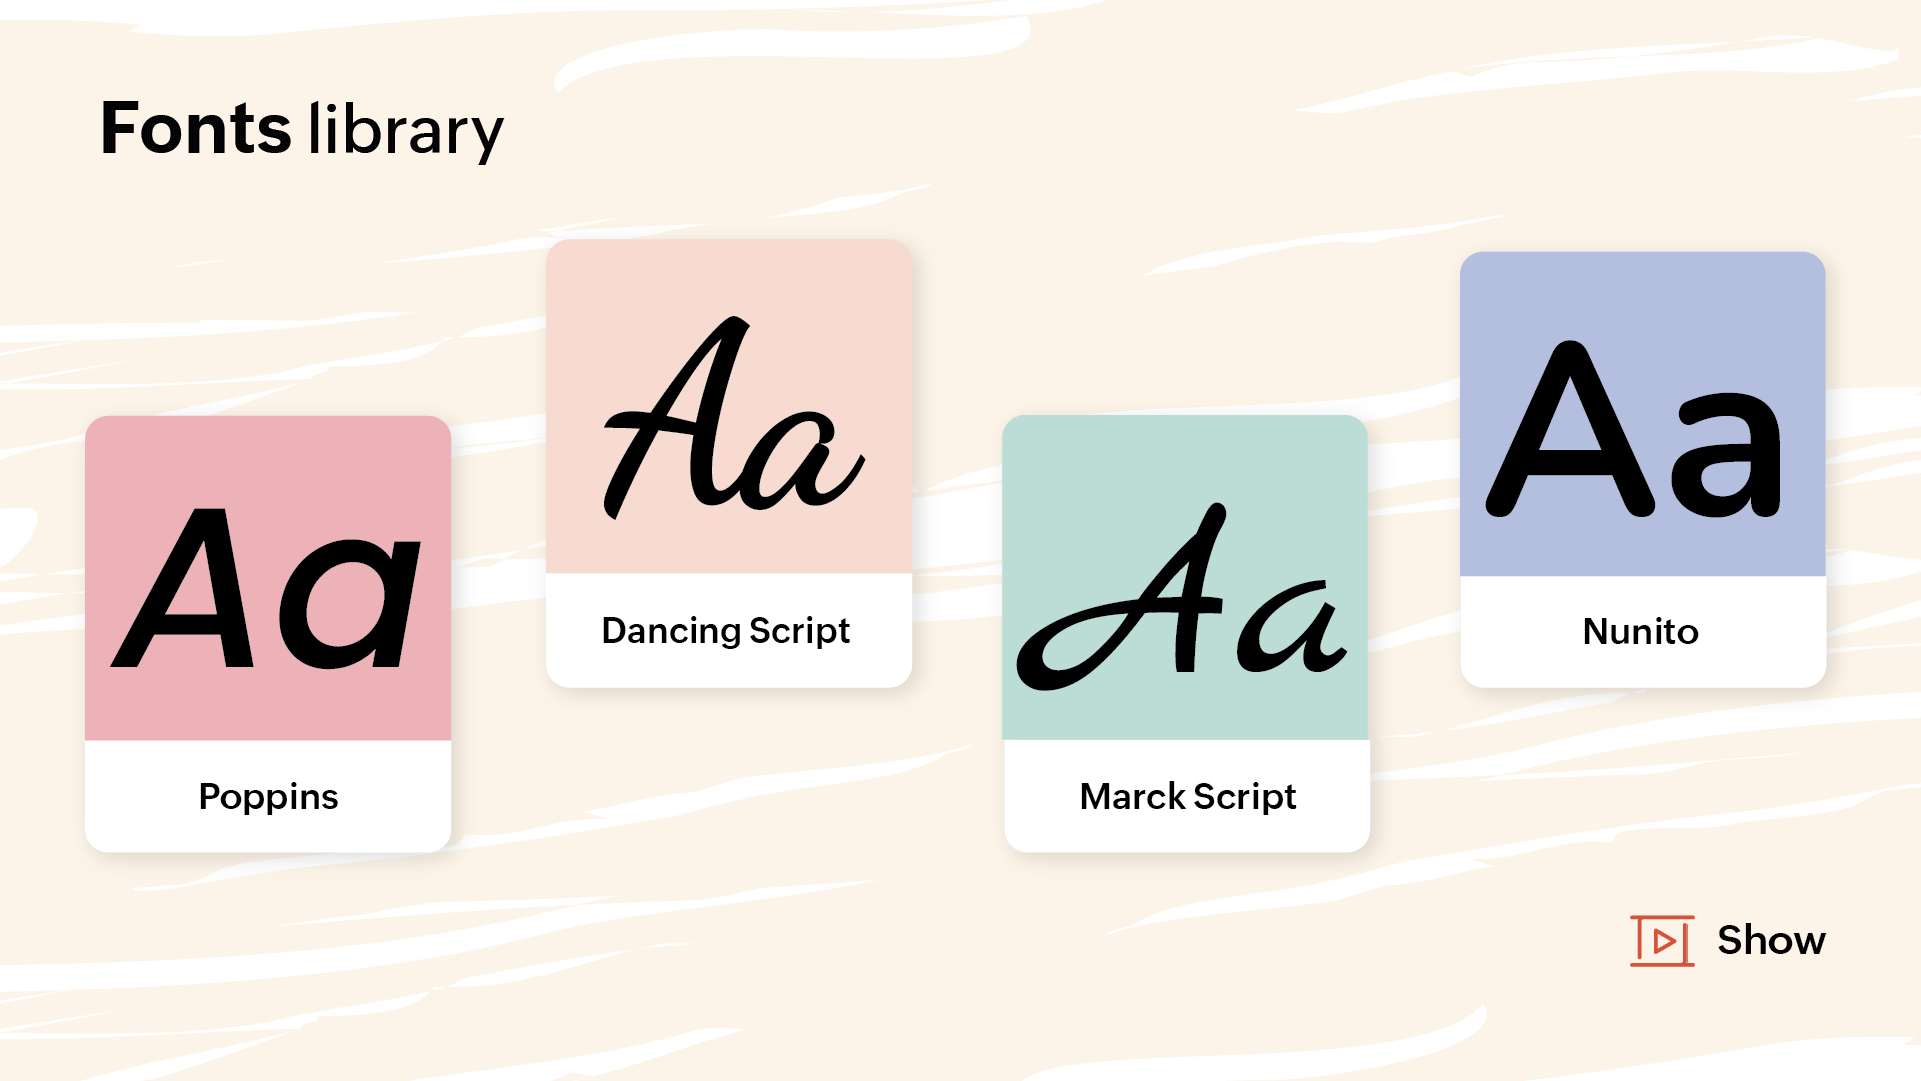 font library image